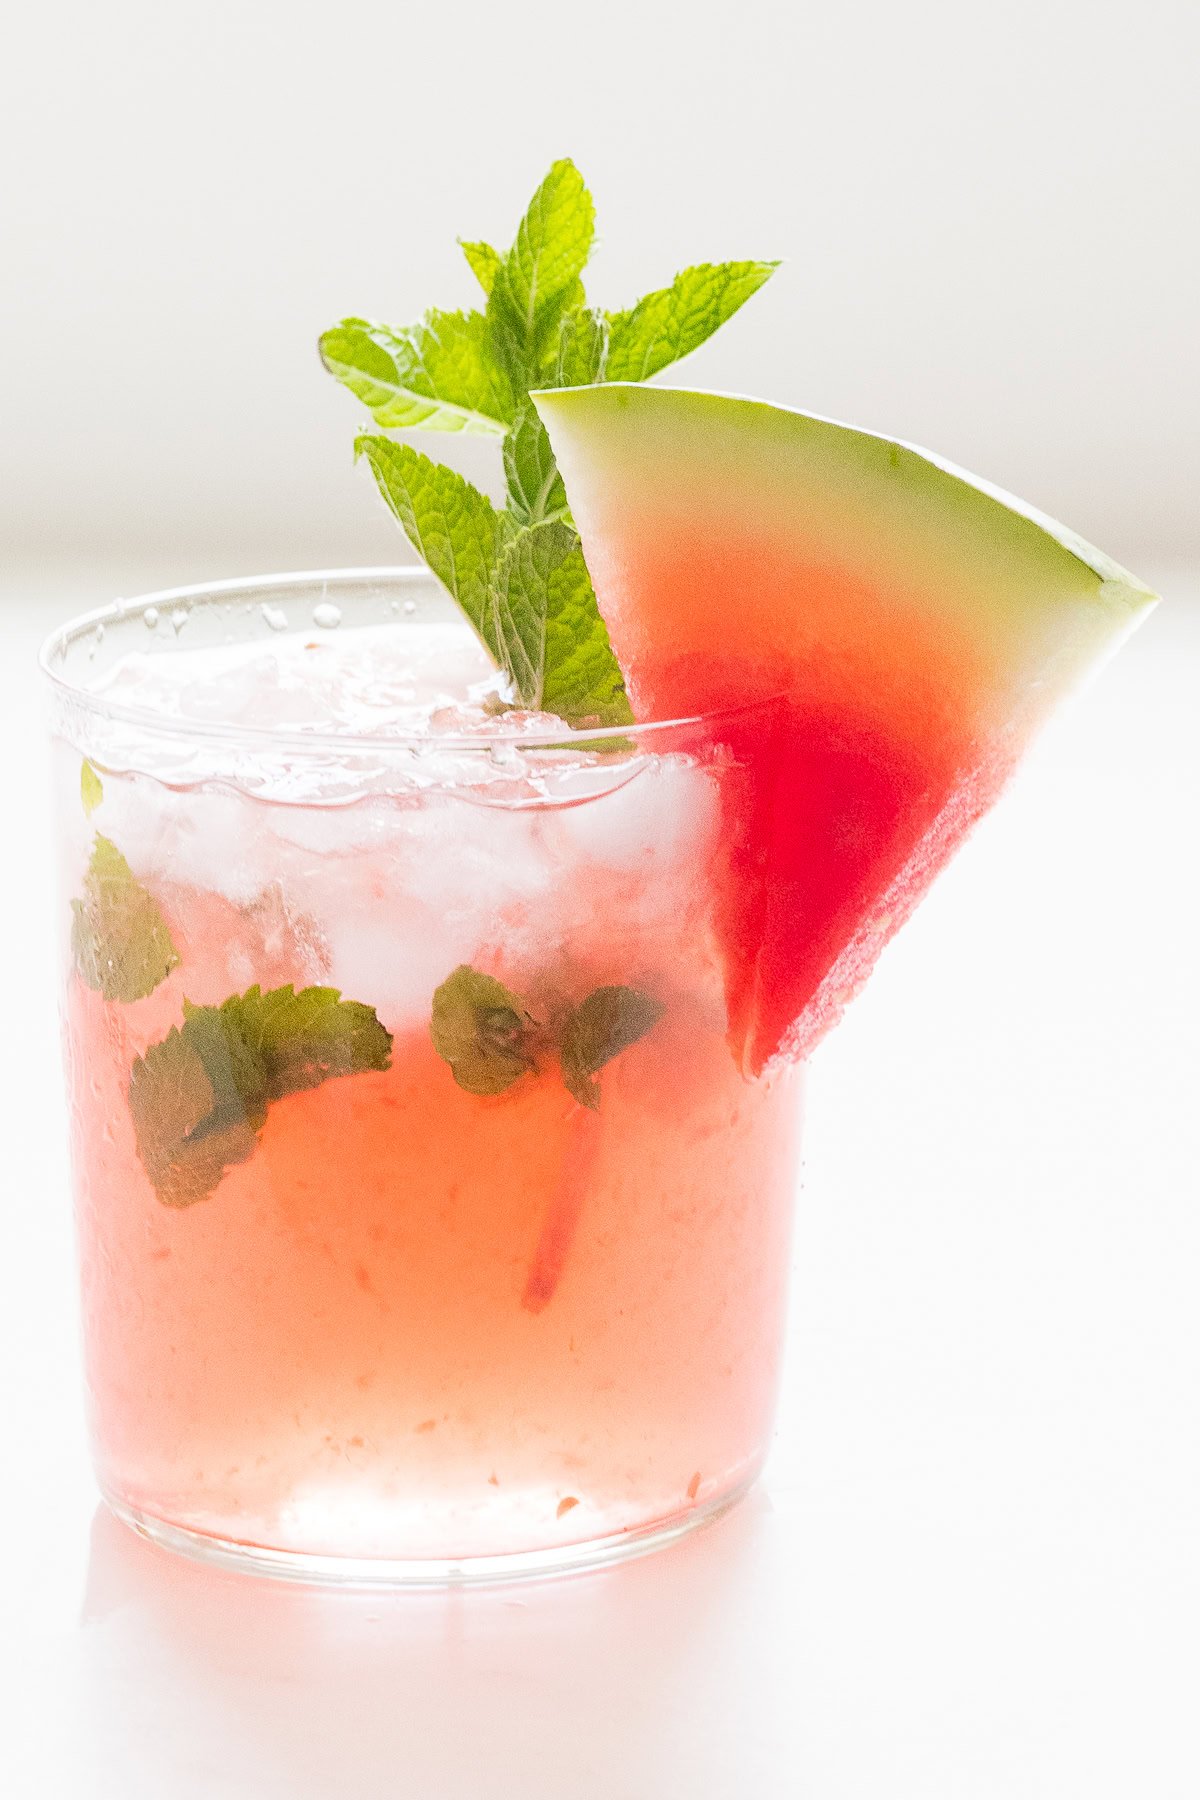 A refreshing watermelon mojito in a glass, garnished with a slice of watermelon and mint leaves, on a white background.